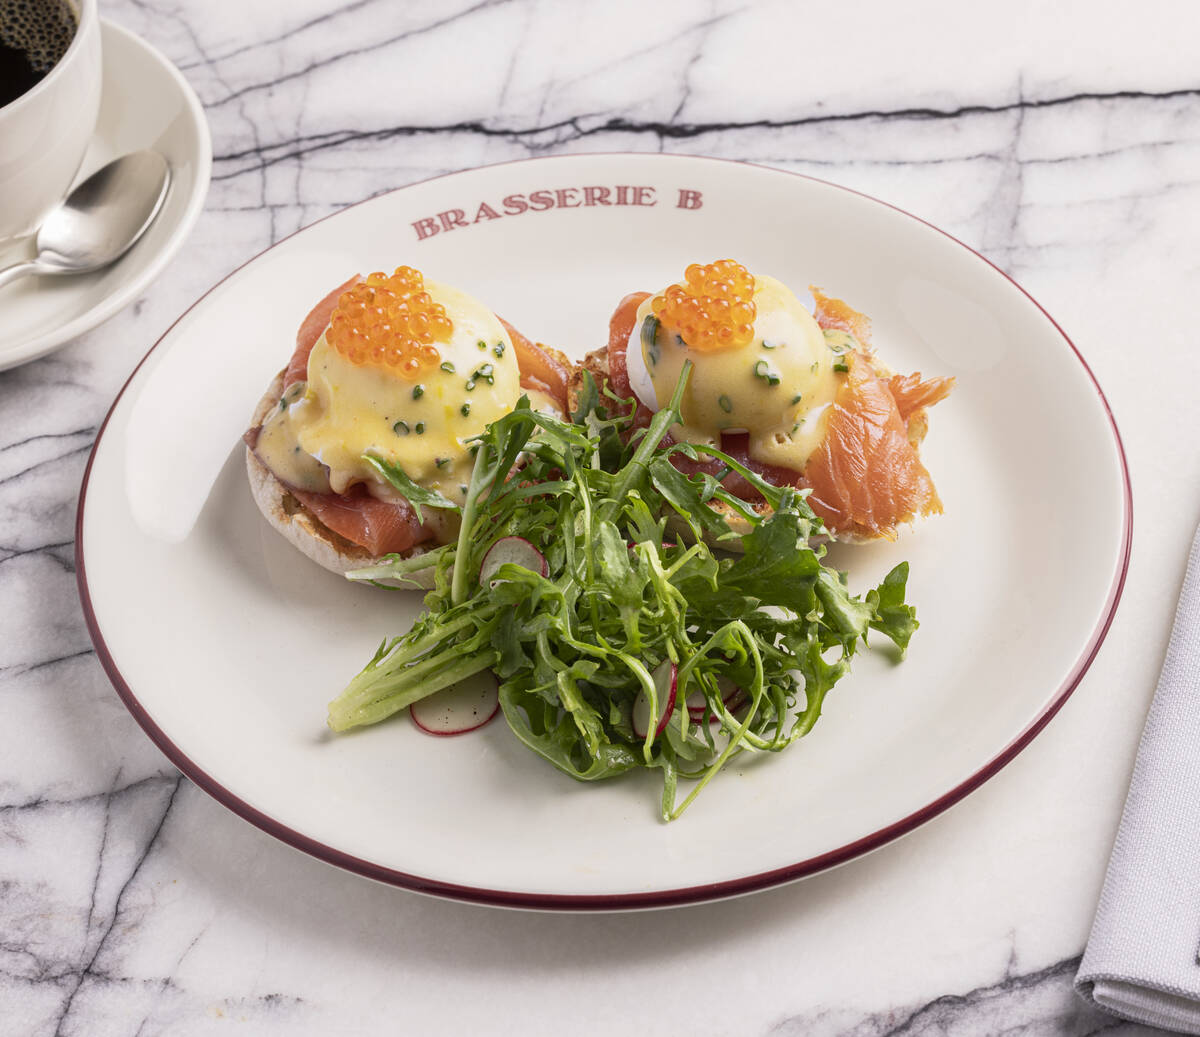 Brasserie B by Bobby Flay in Caesars Palace on the Las Vegas Strip serves weekday brunch. (Caes ...